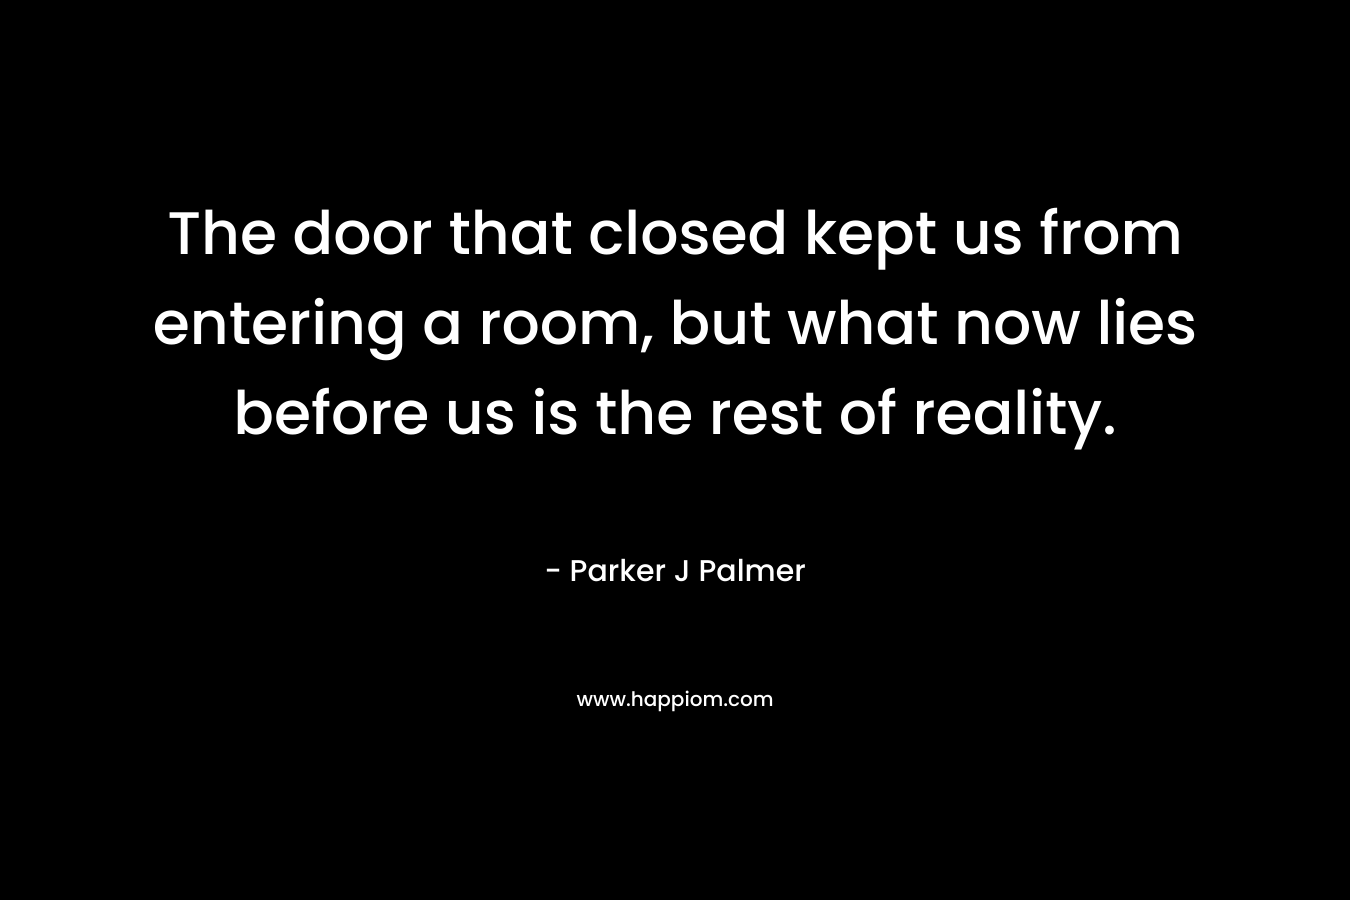 The door that closed kept us from entering a room, but what now lies before us is the rest of reality. – Parker J Palmer